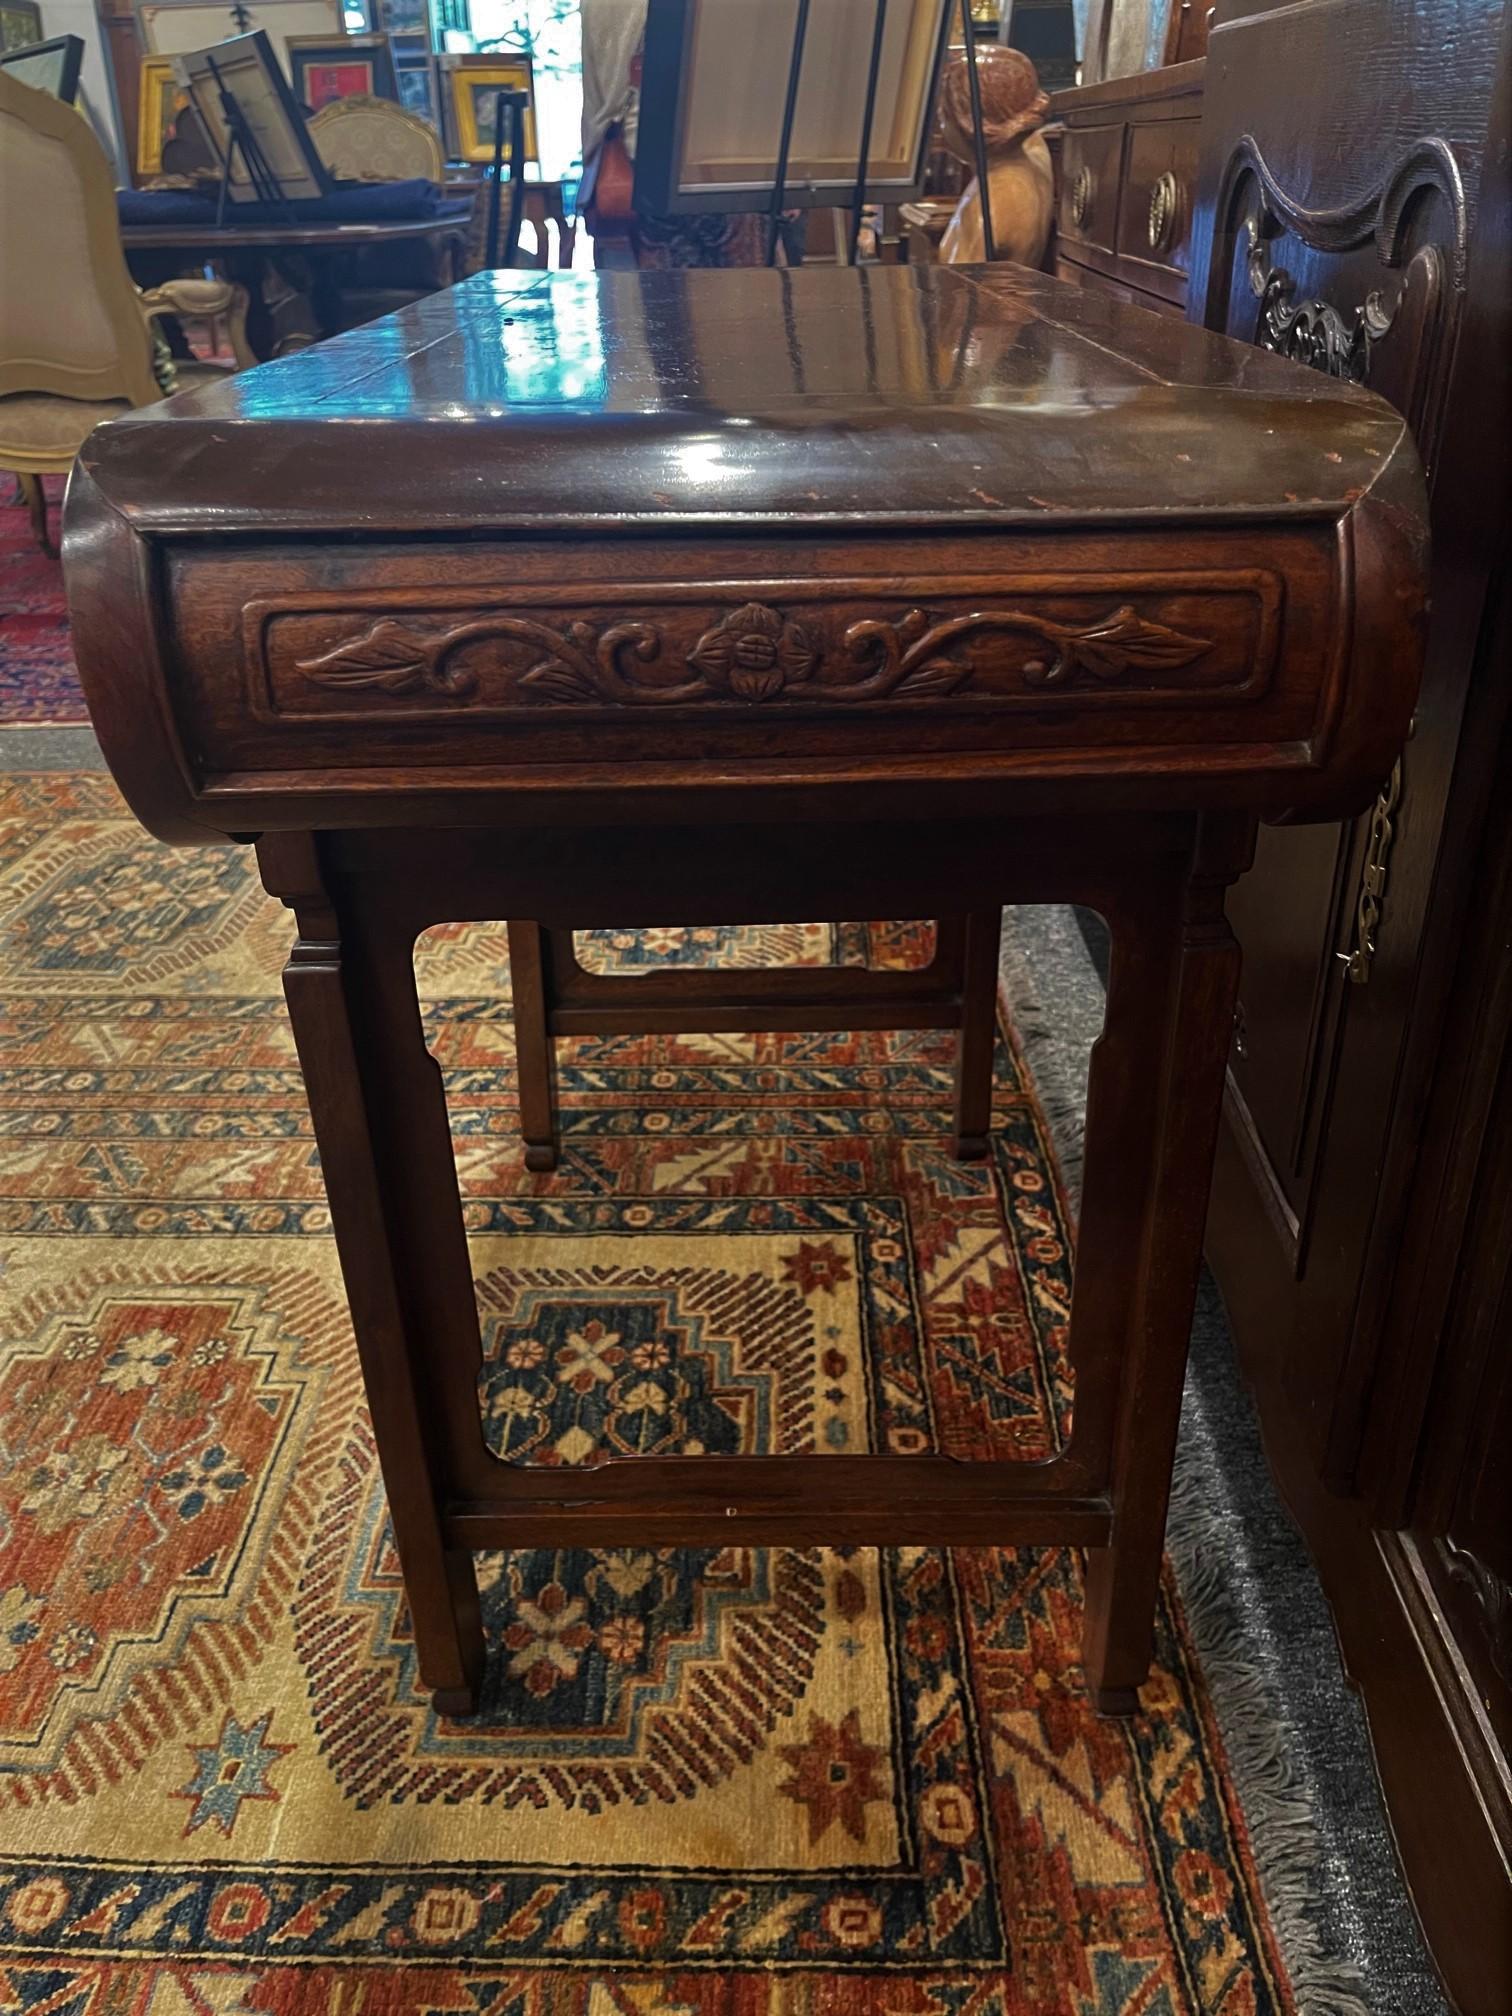 A mahogany Ming Chinese altar table with sides carved and decorative carvings on legs, Early 20th Century.